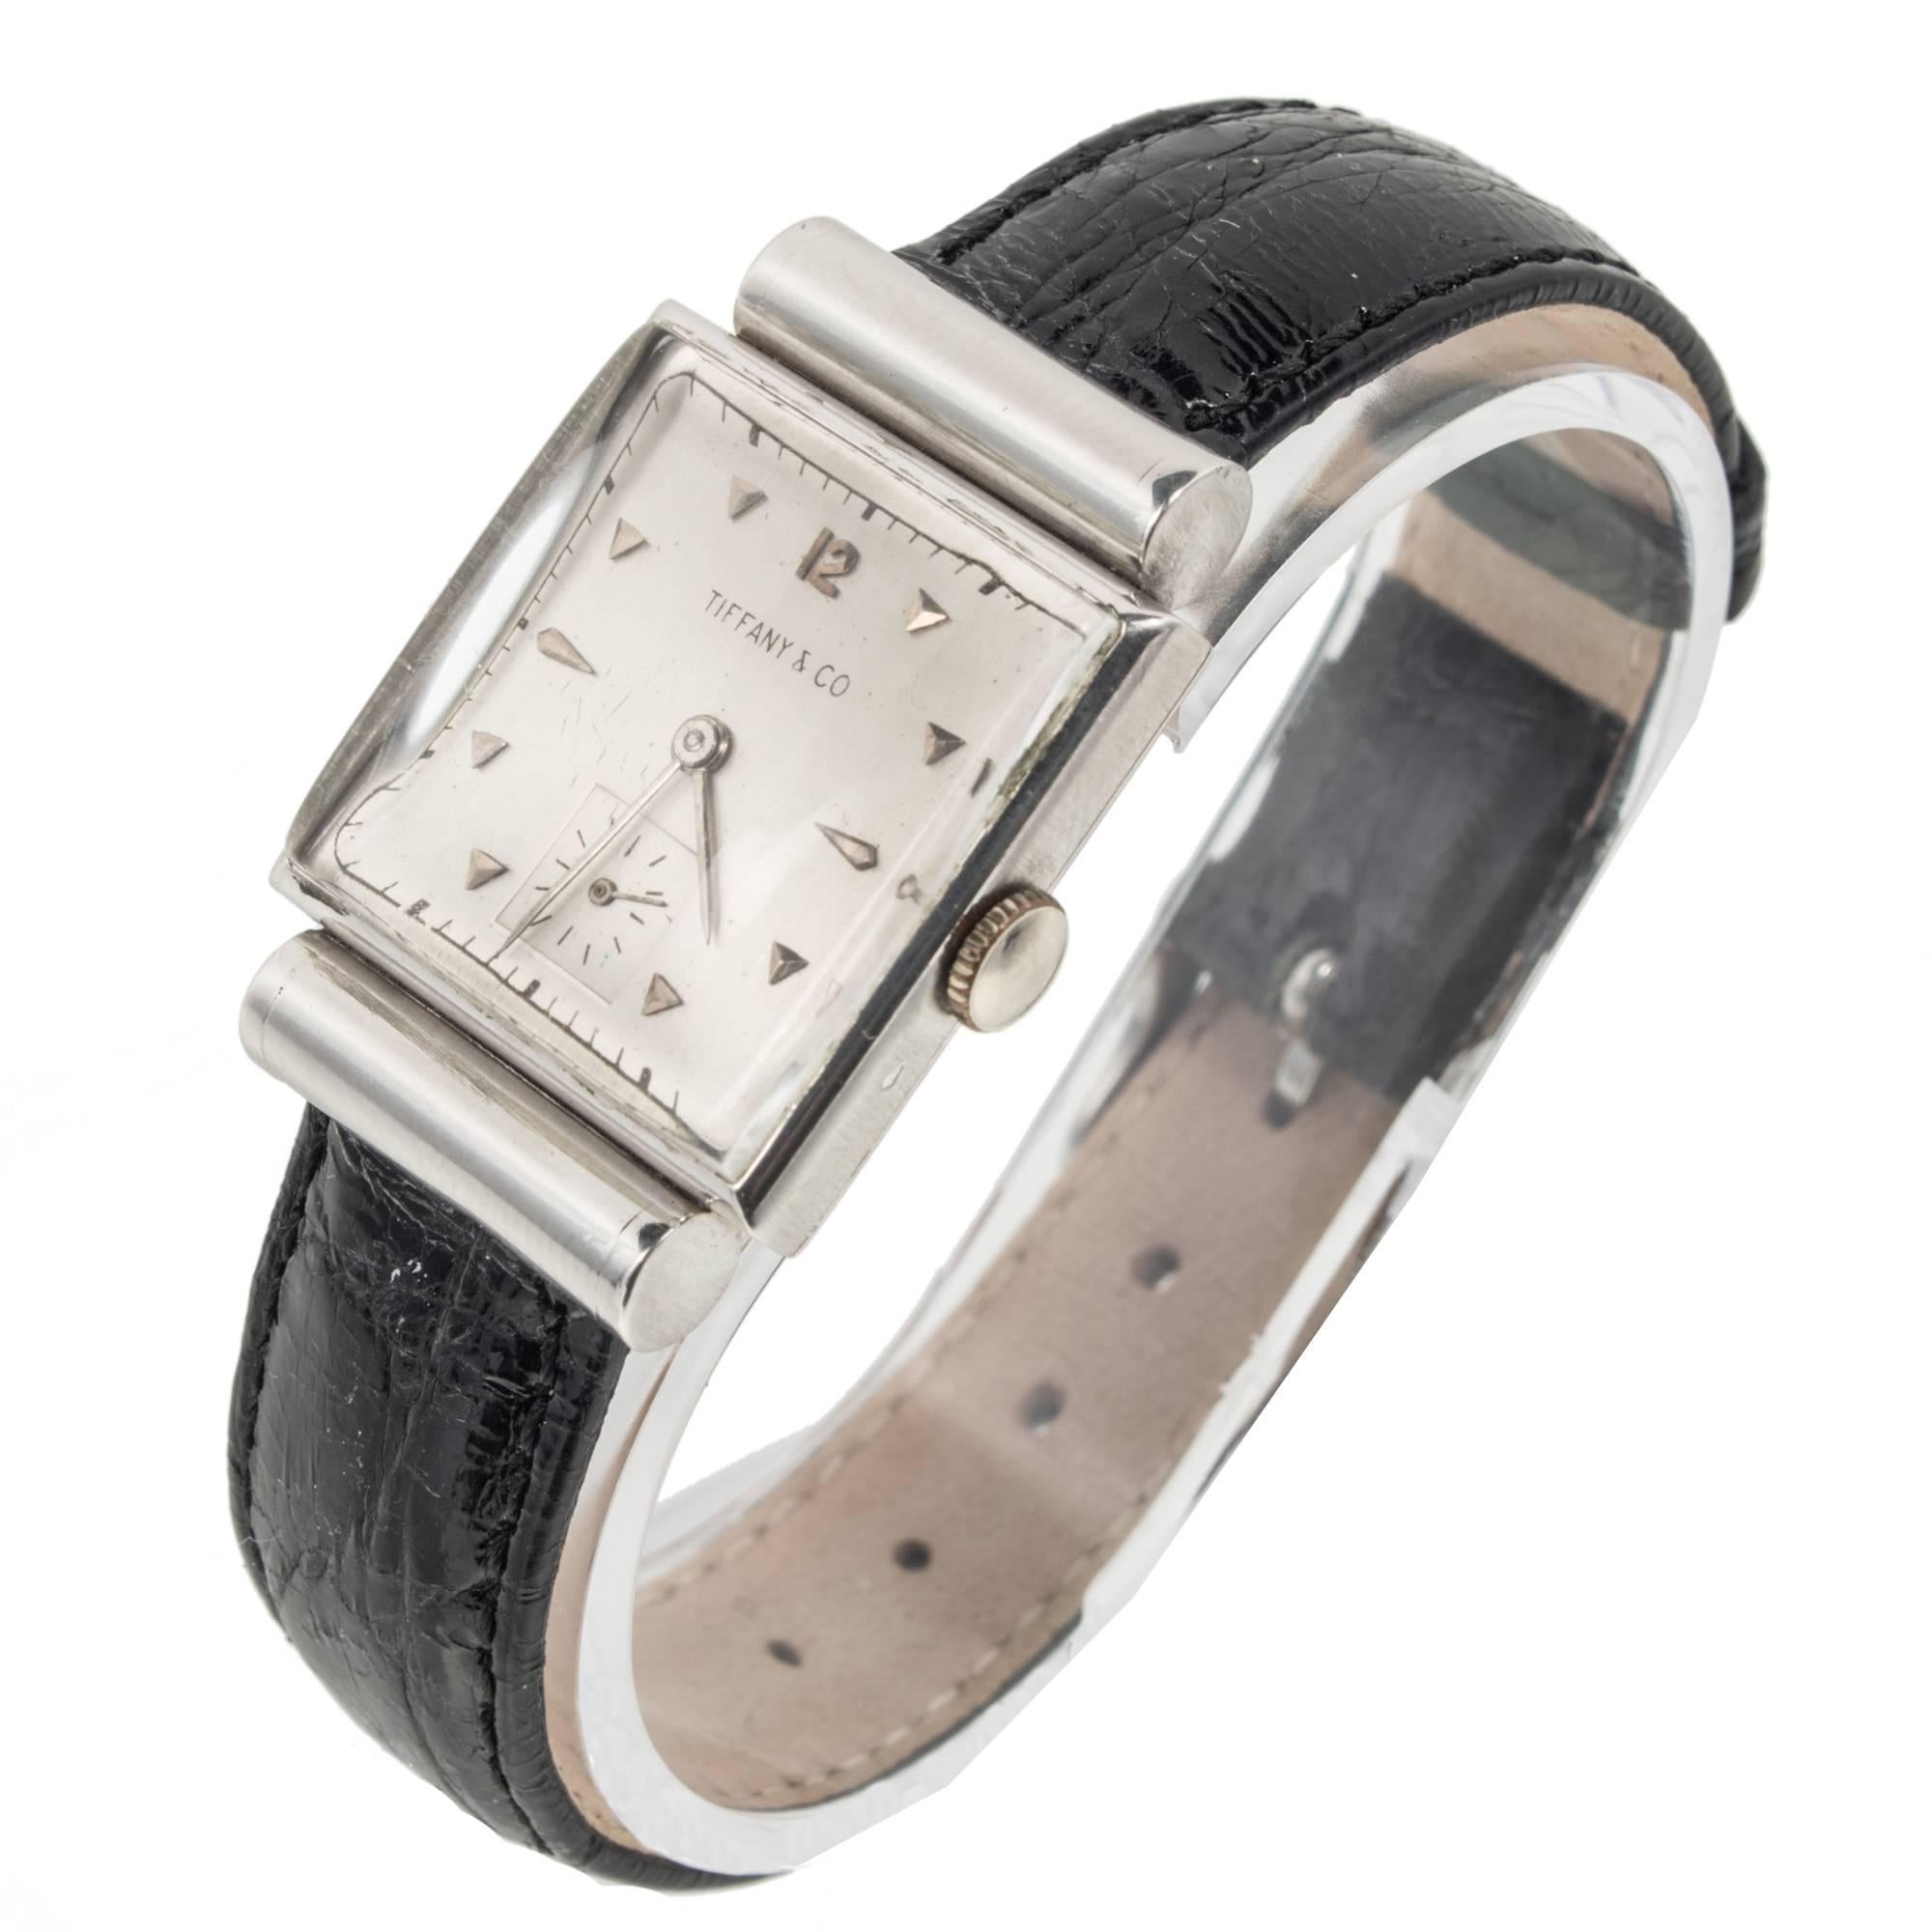 Movado Platinum Square Wristwatch with Hooded Lugs Retailed by Tiffany & Co In Good Condition For Sale In Stamford, CT